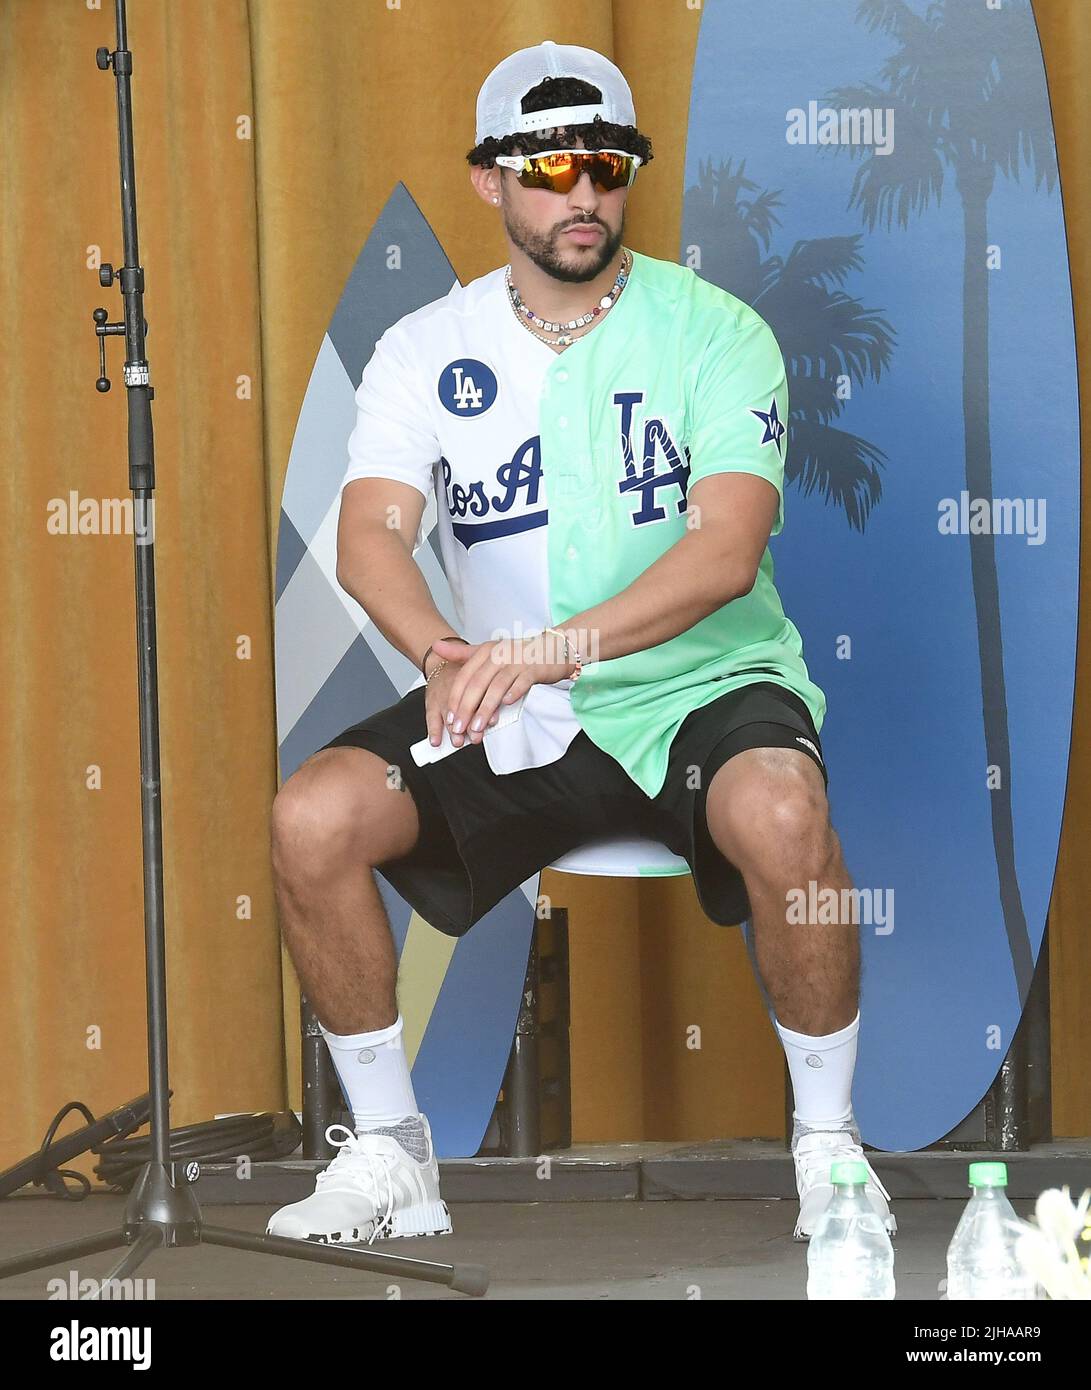 Bad Bunny was the star of the show at the @MLB All-Star Celeb Game  @badbunnypr 🇵🇷🇵🇷